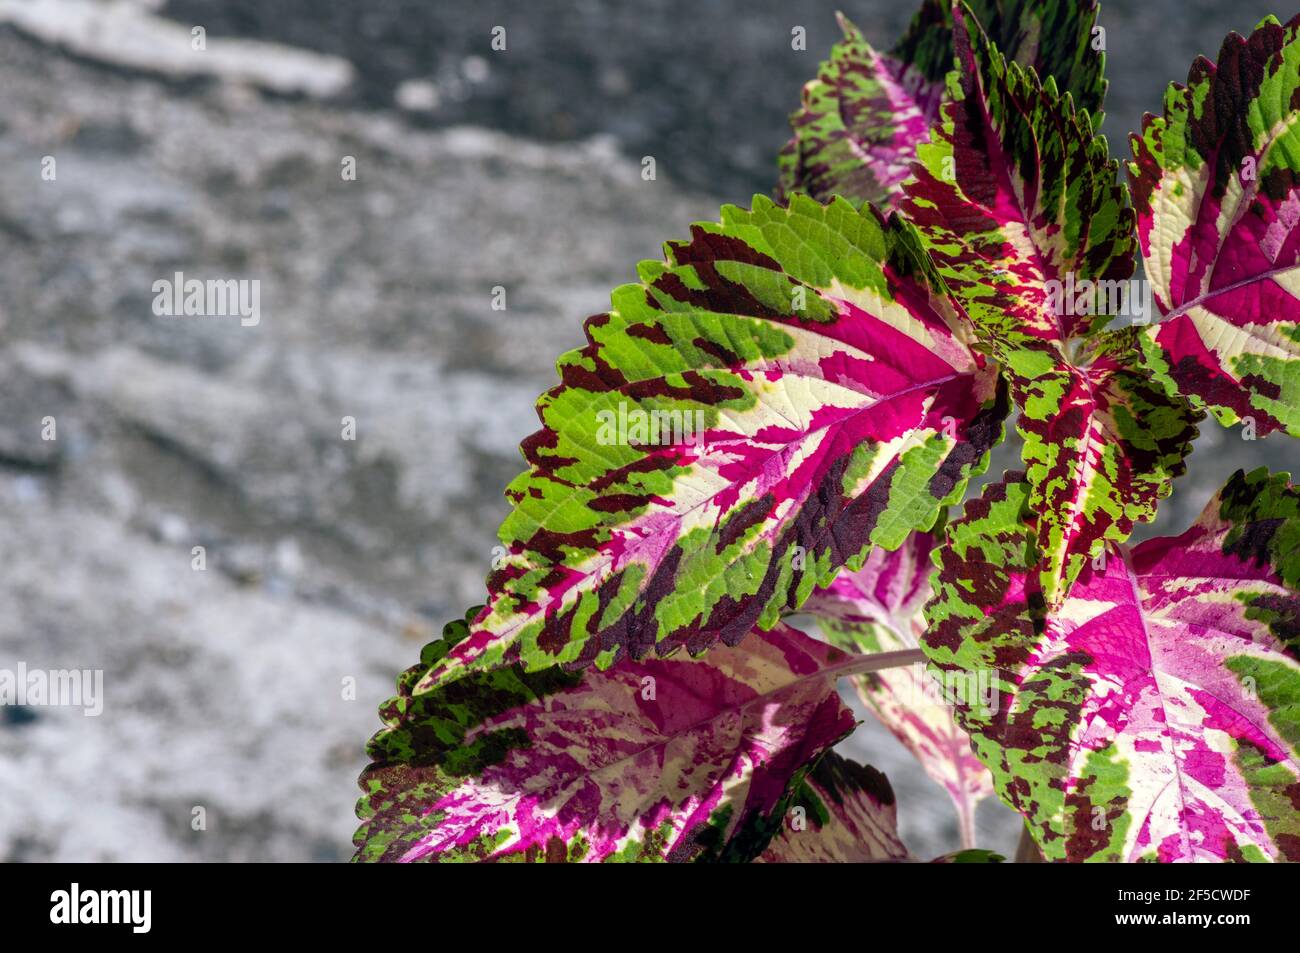 Beautiful leaves of Rex Begonia plant, a colorful houseplant Stock Photo